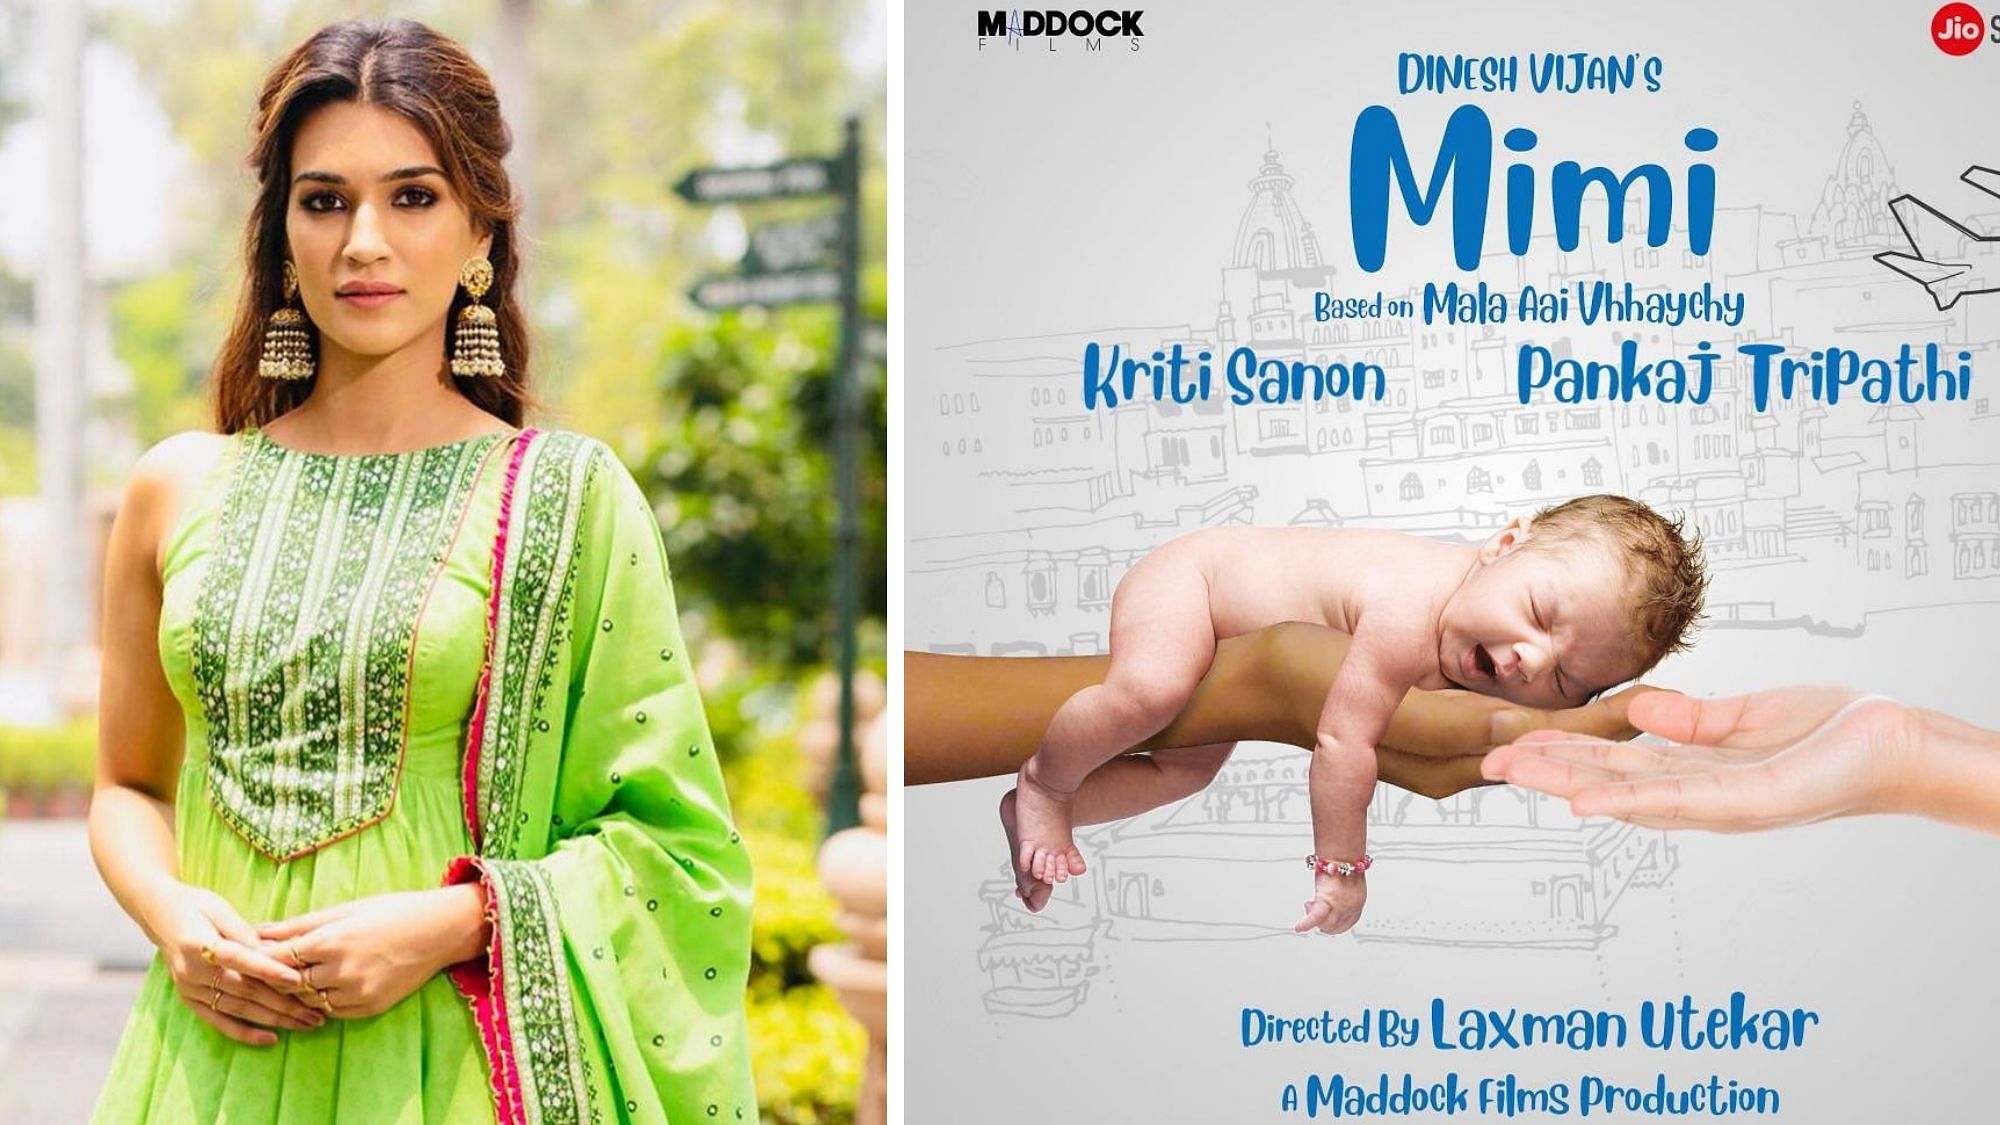 Mimi Film Based on Surrogacy Poster Out: The film will be directed by Laxman Utekar and produced by Maddock Films and Jio Studios. 